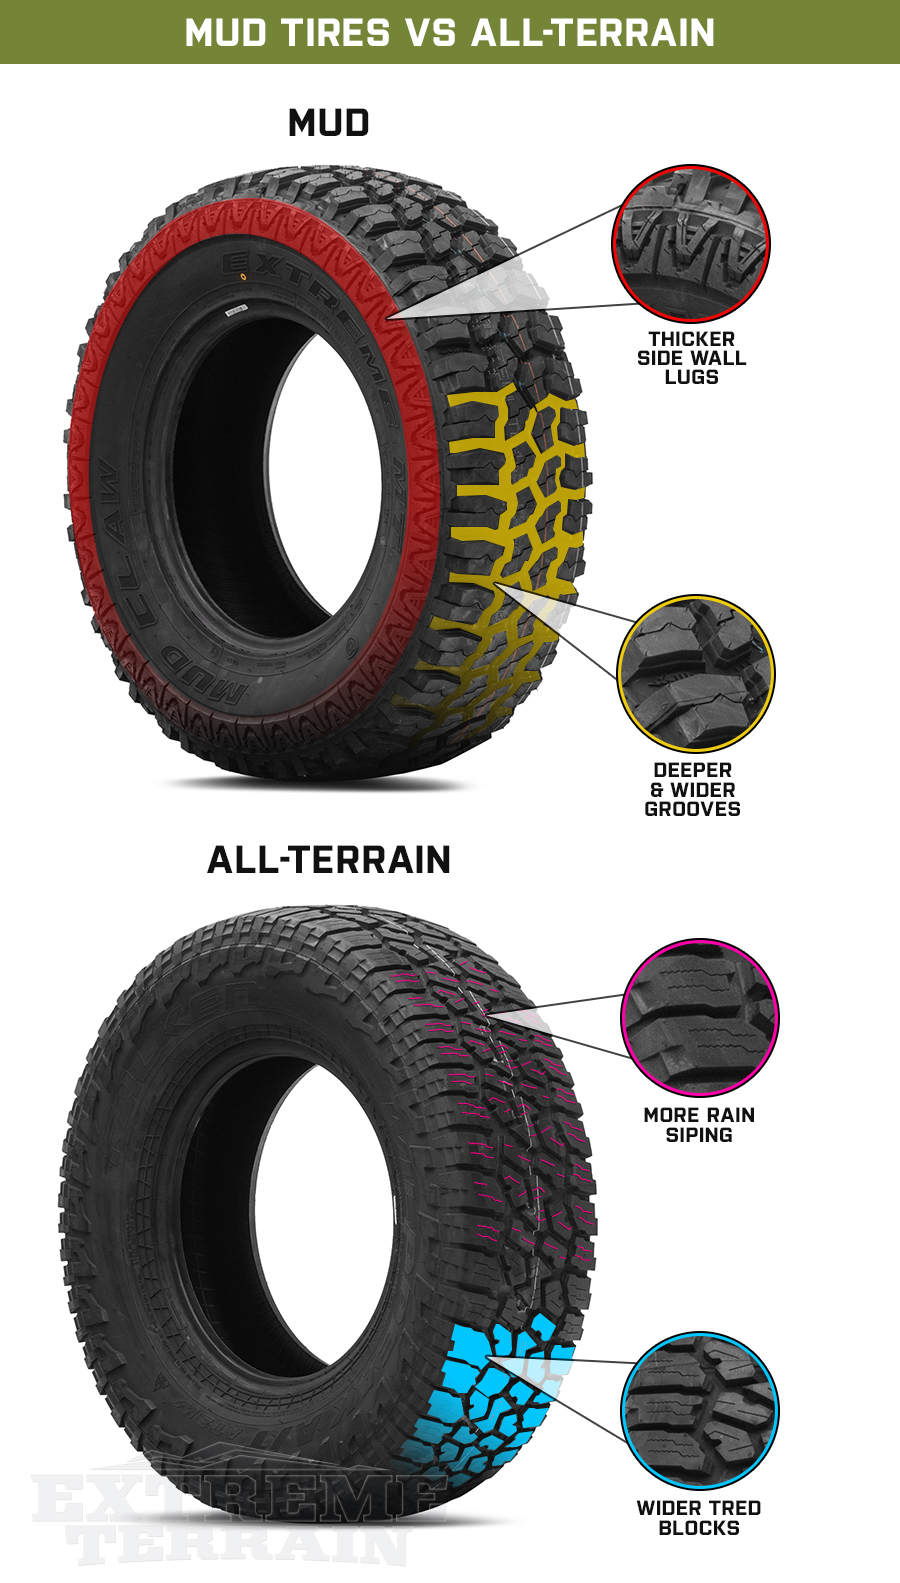 Mud Tire Features vs All-Terrain Tire Features Graphic